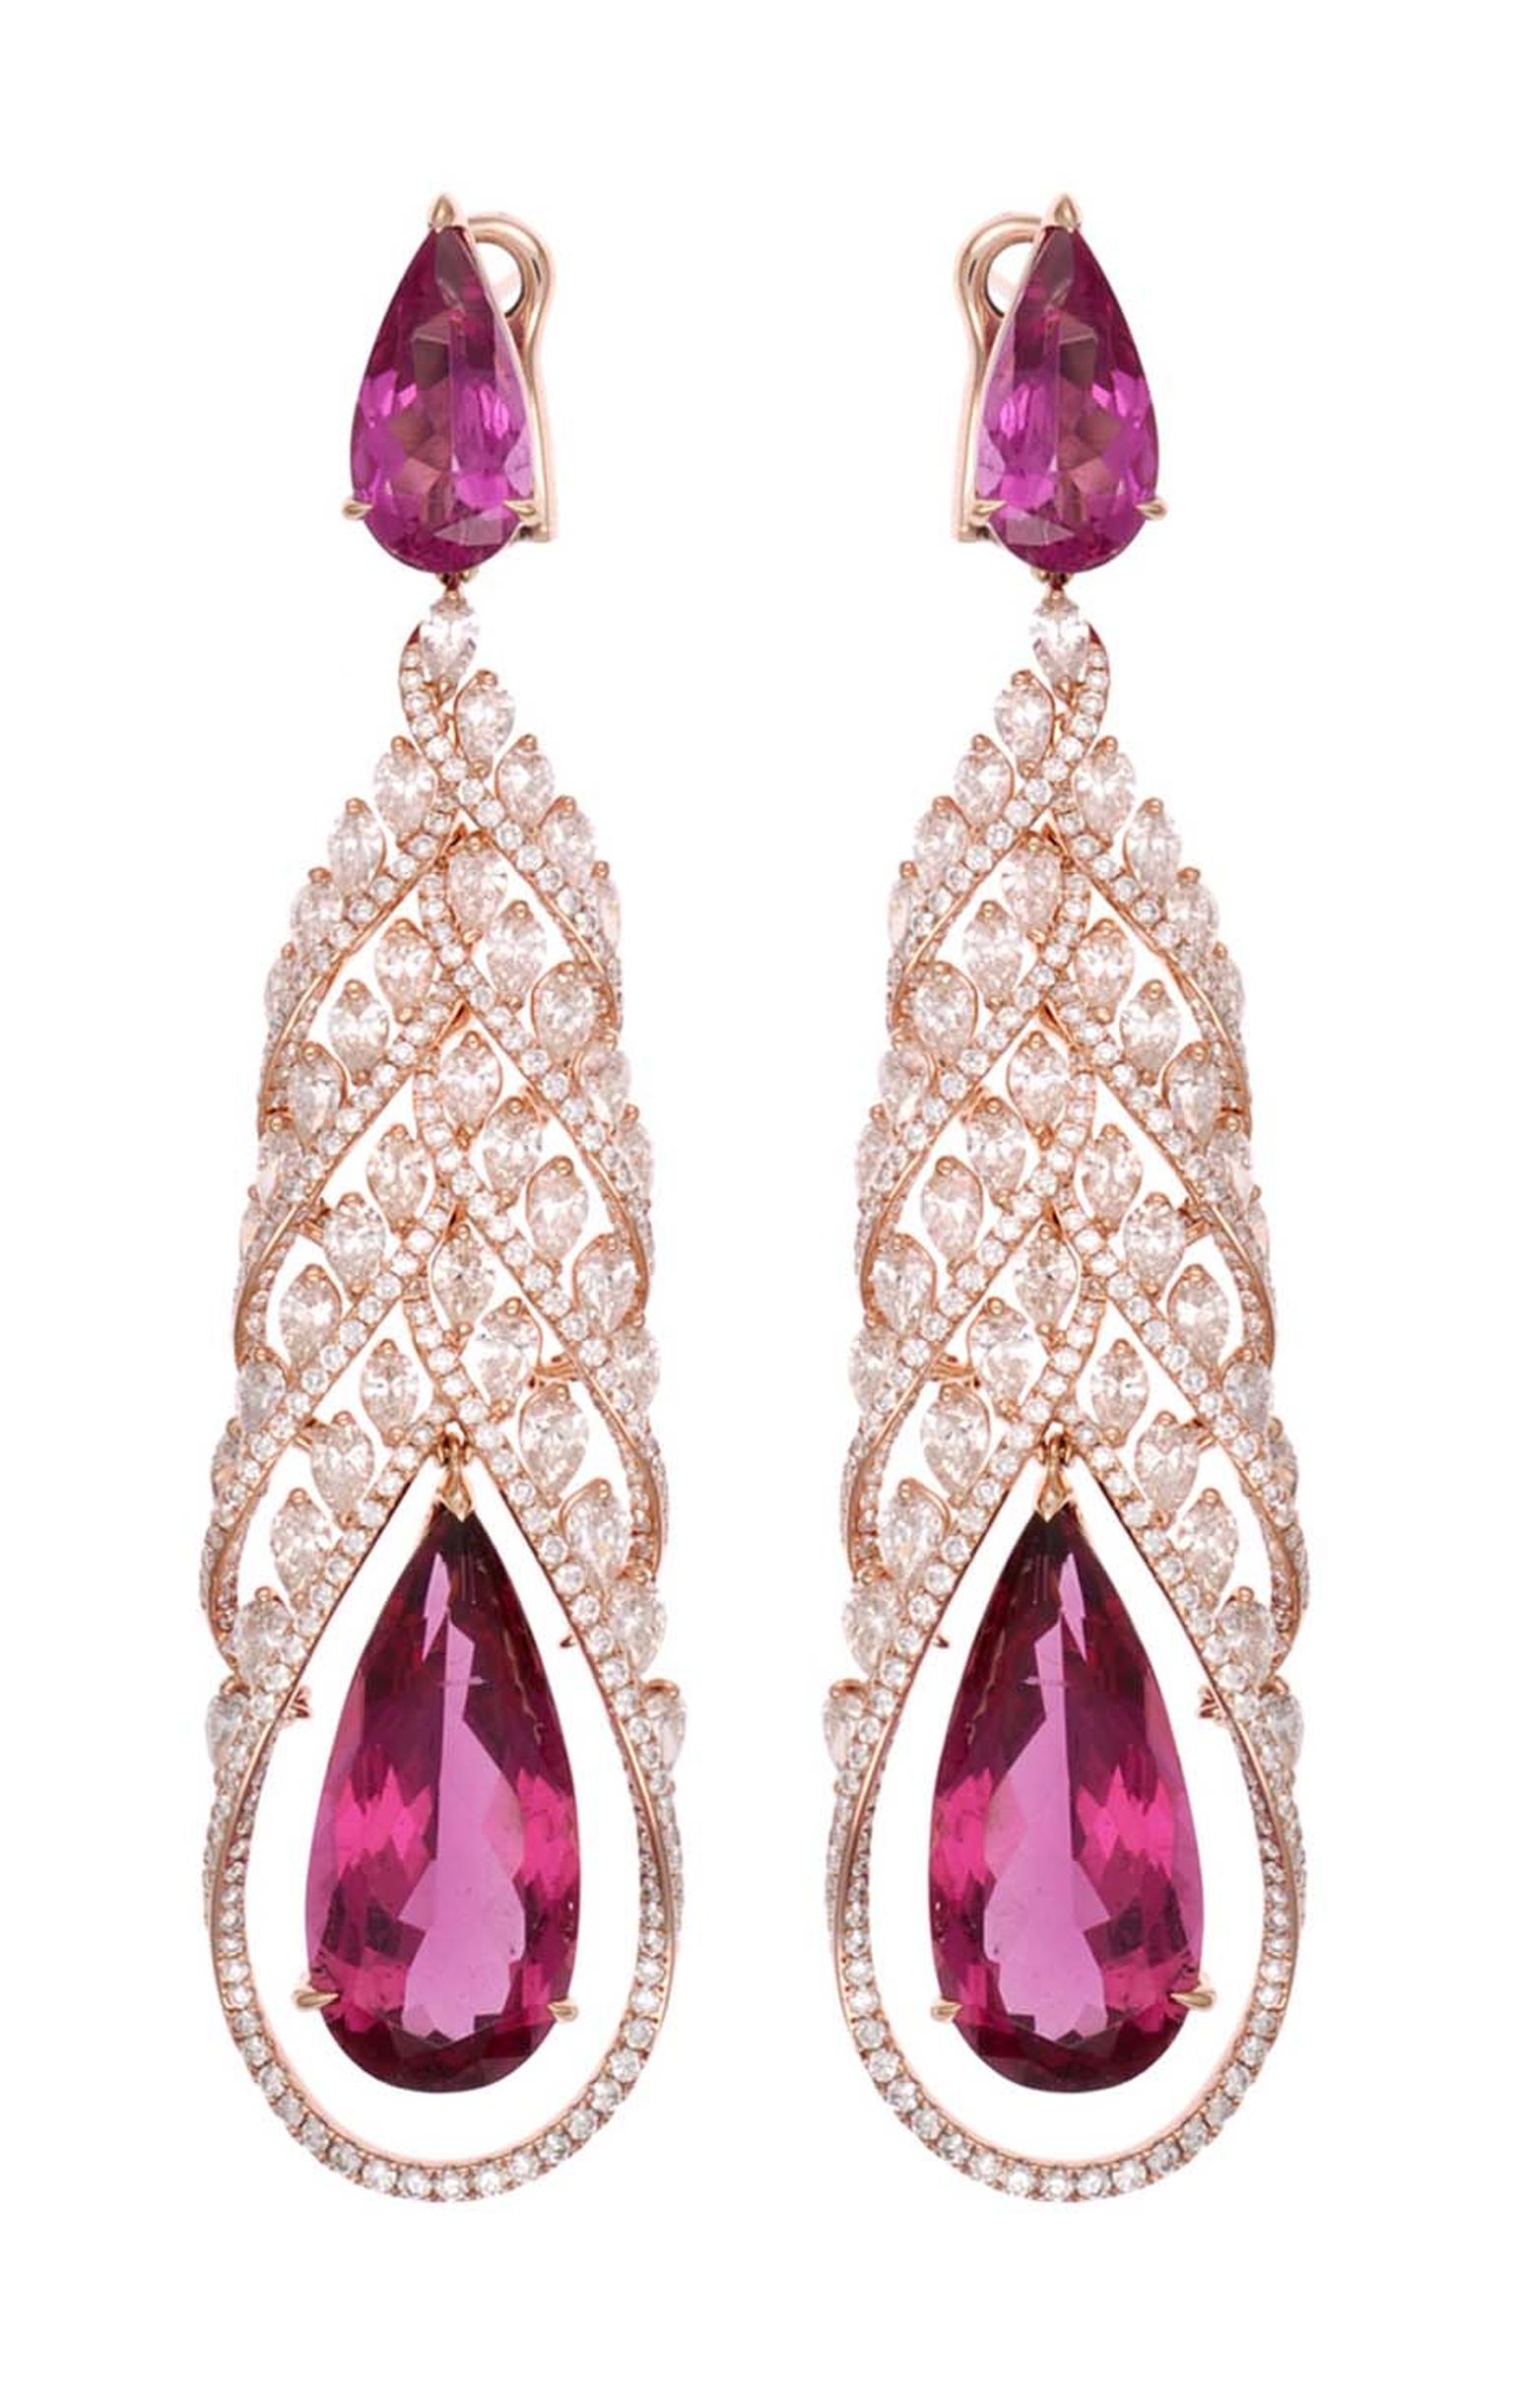 Chopard Red Carpet Collection earrings featuring pear-shaped ubellites surrounded by diamonds, set in rose gold (£POA).